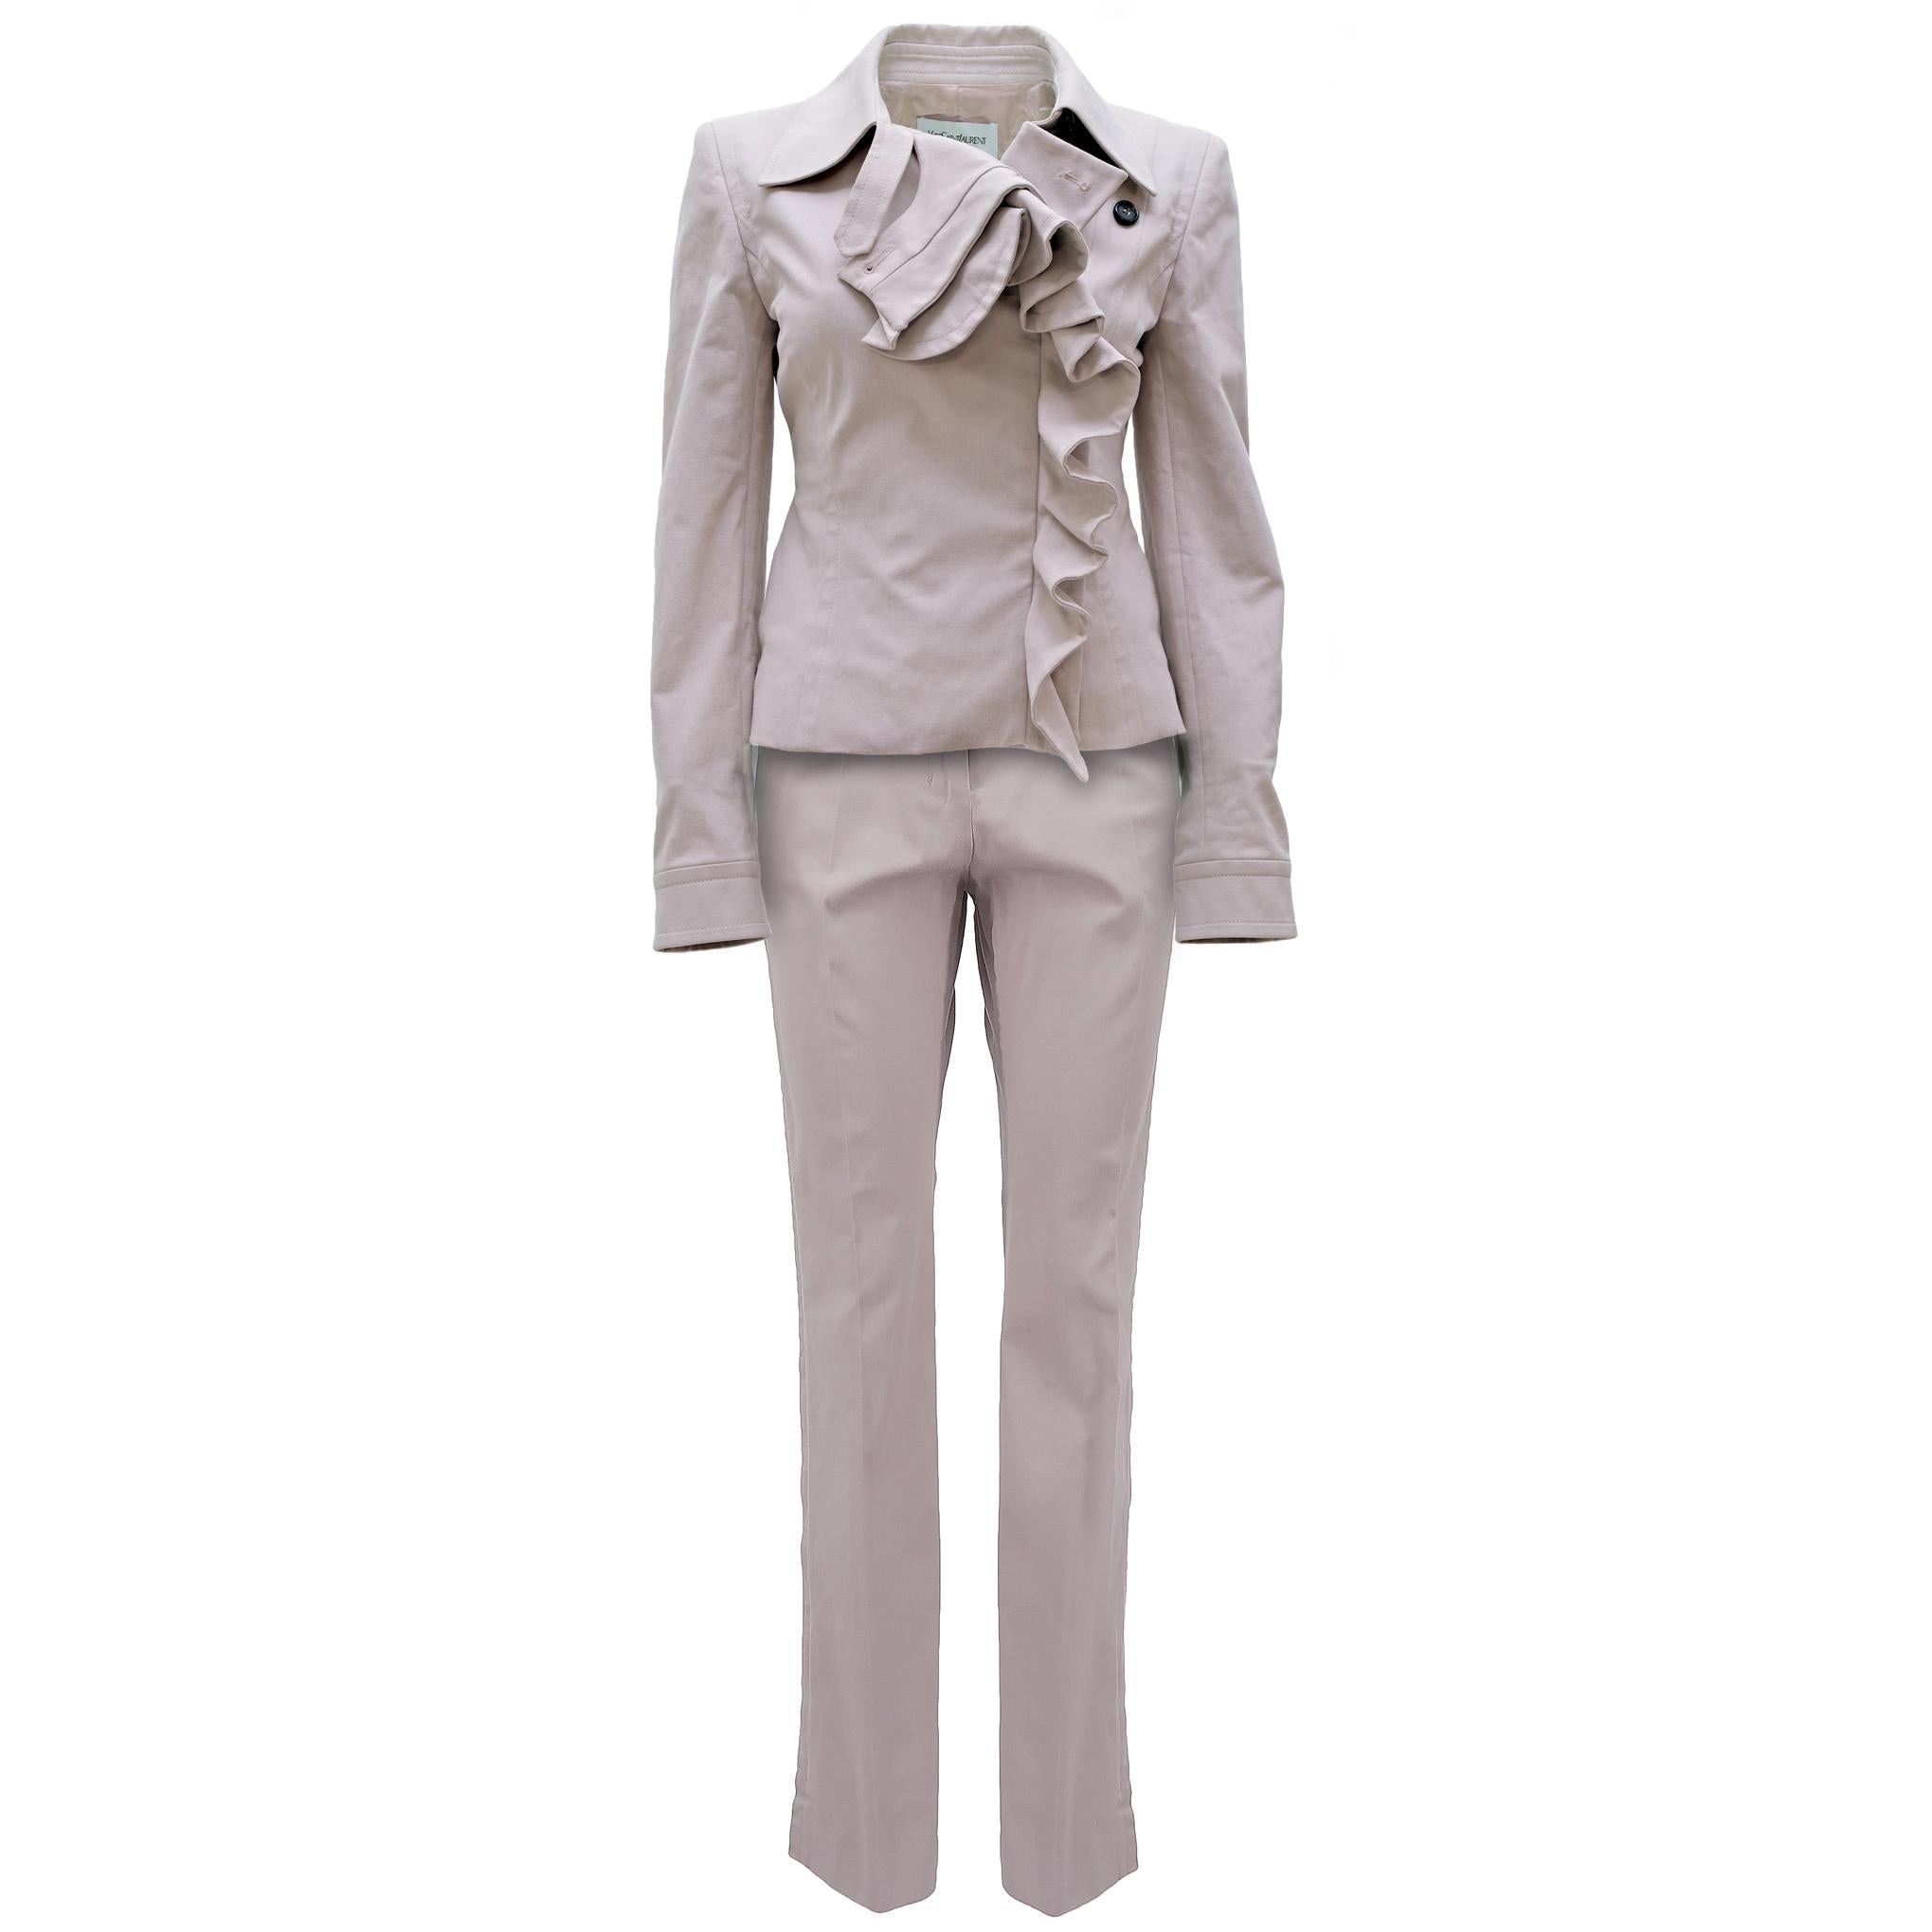 Yves Saint Laurent by Tom Ford FW-03 Cotton High Neck Blazer - Ruffle Detailing 9